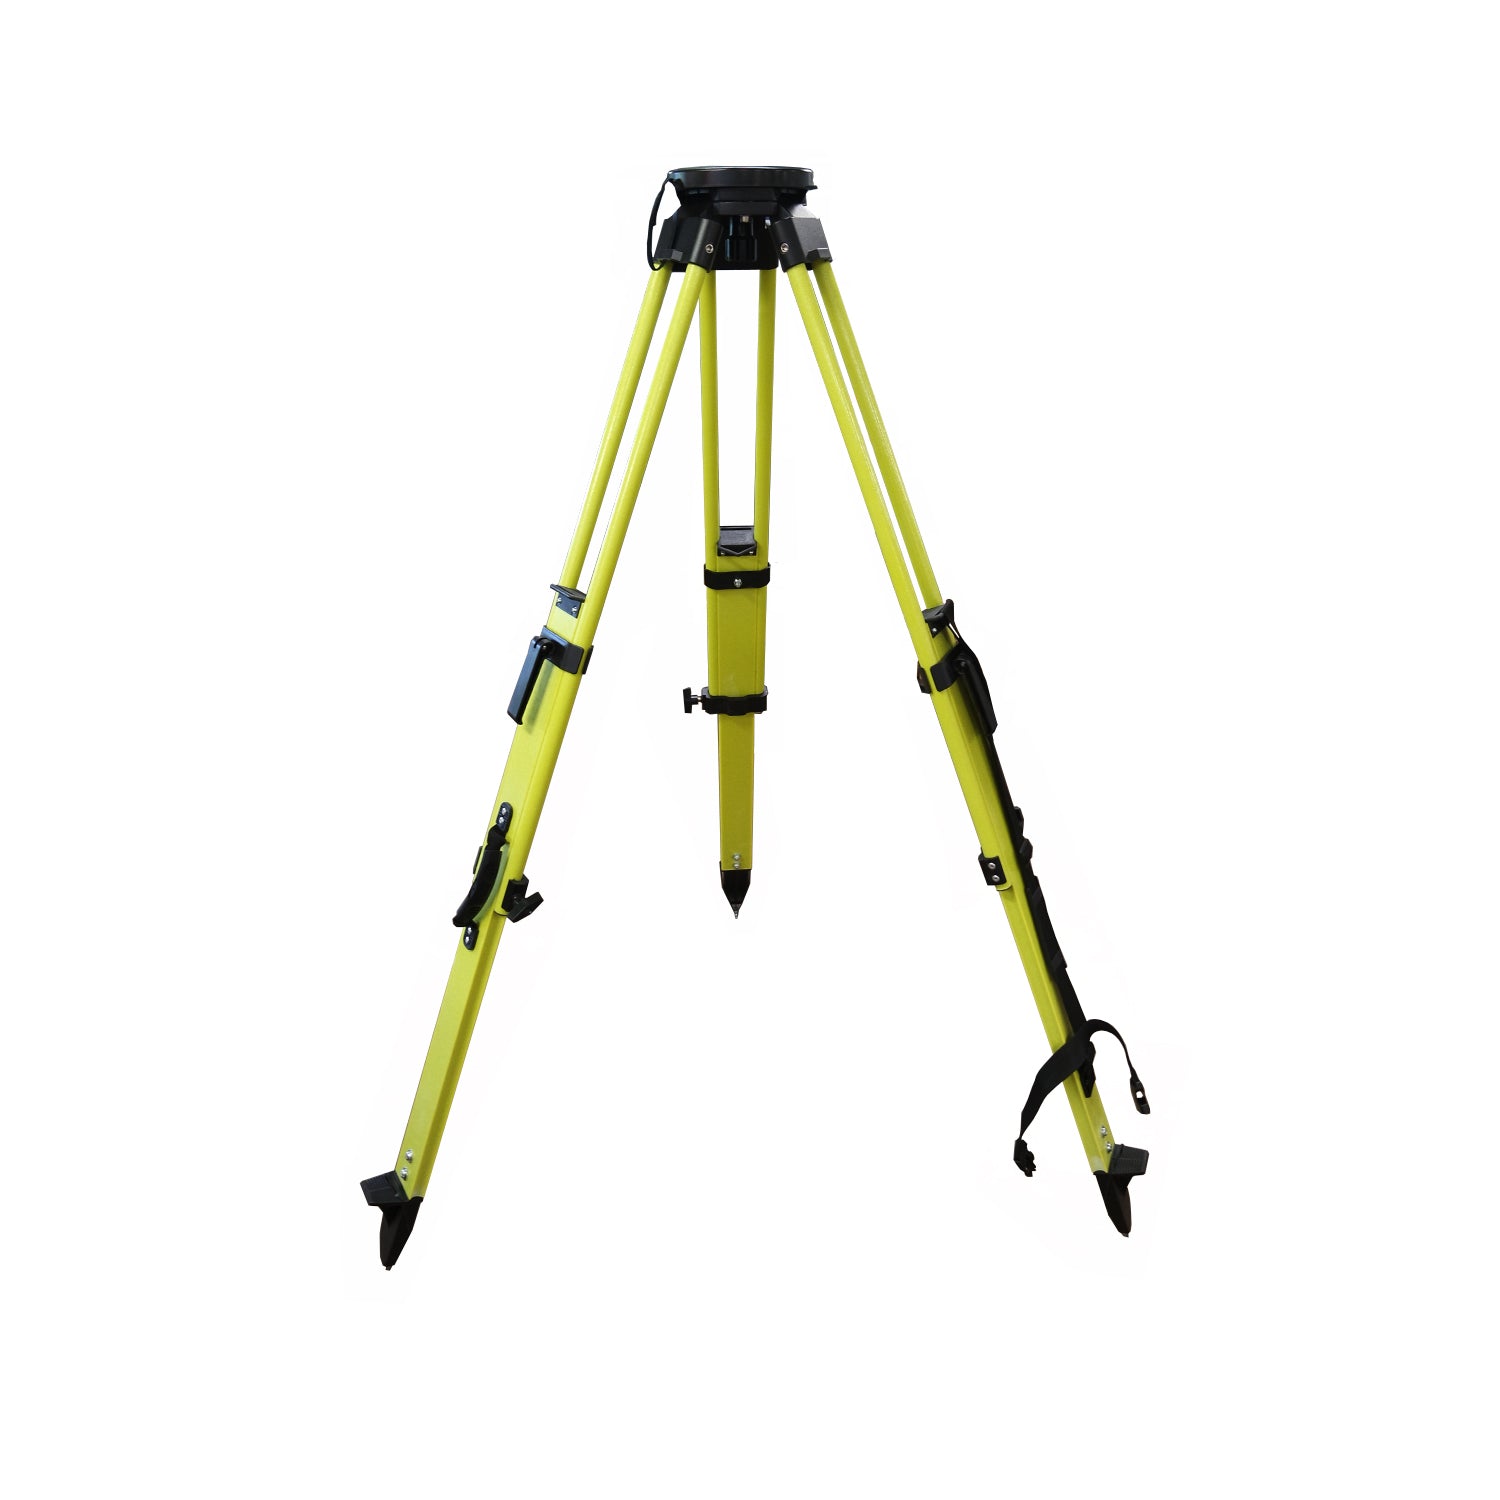 Sitemax Heavy Duty Composite Tripod 01-HVFG20-DCB (Green) -Tripods & Accessories- eGPS Solutions Inc.